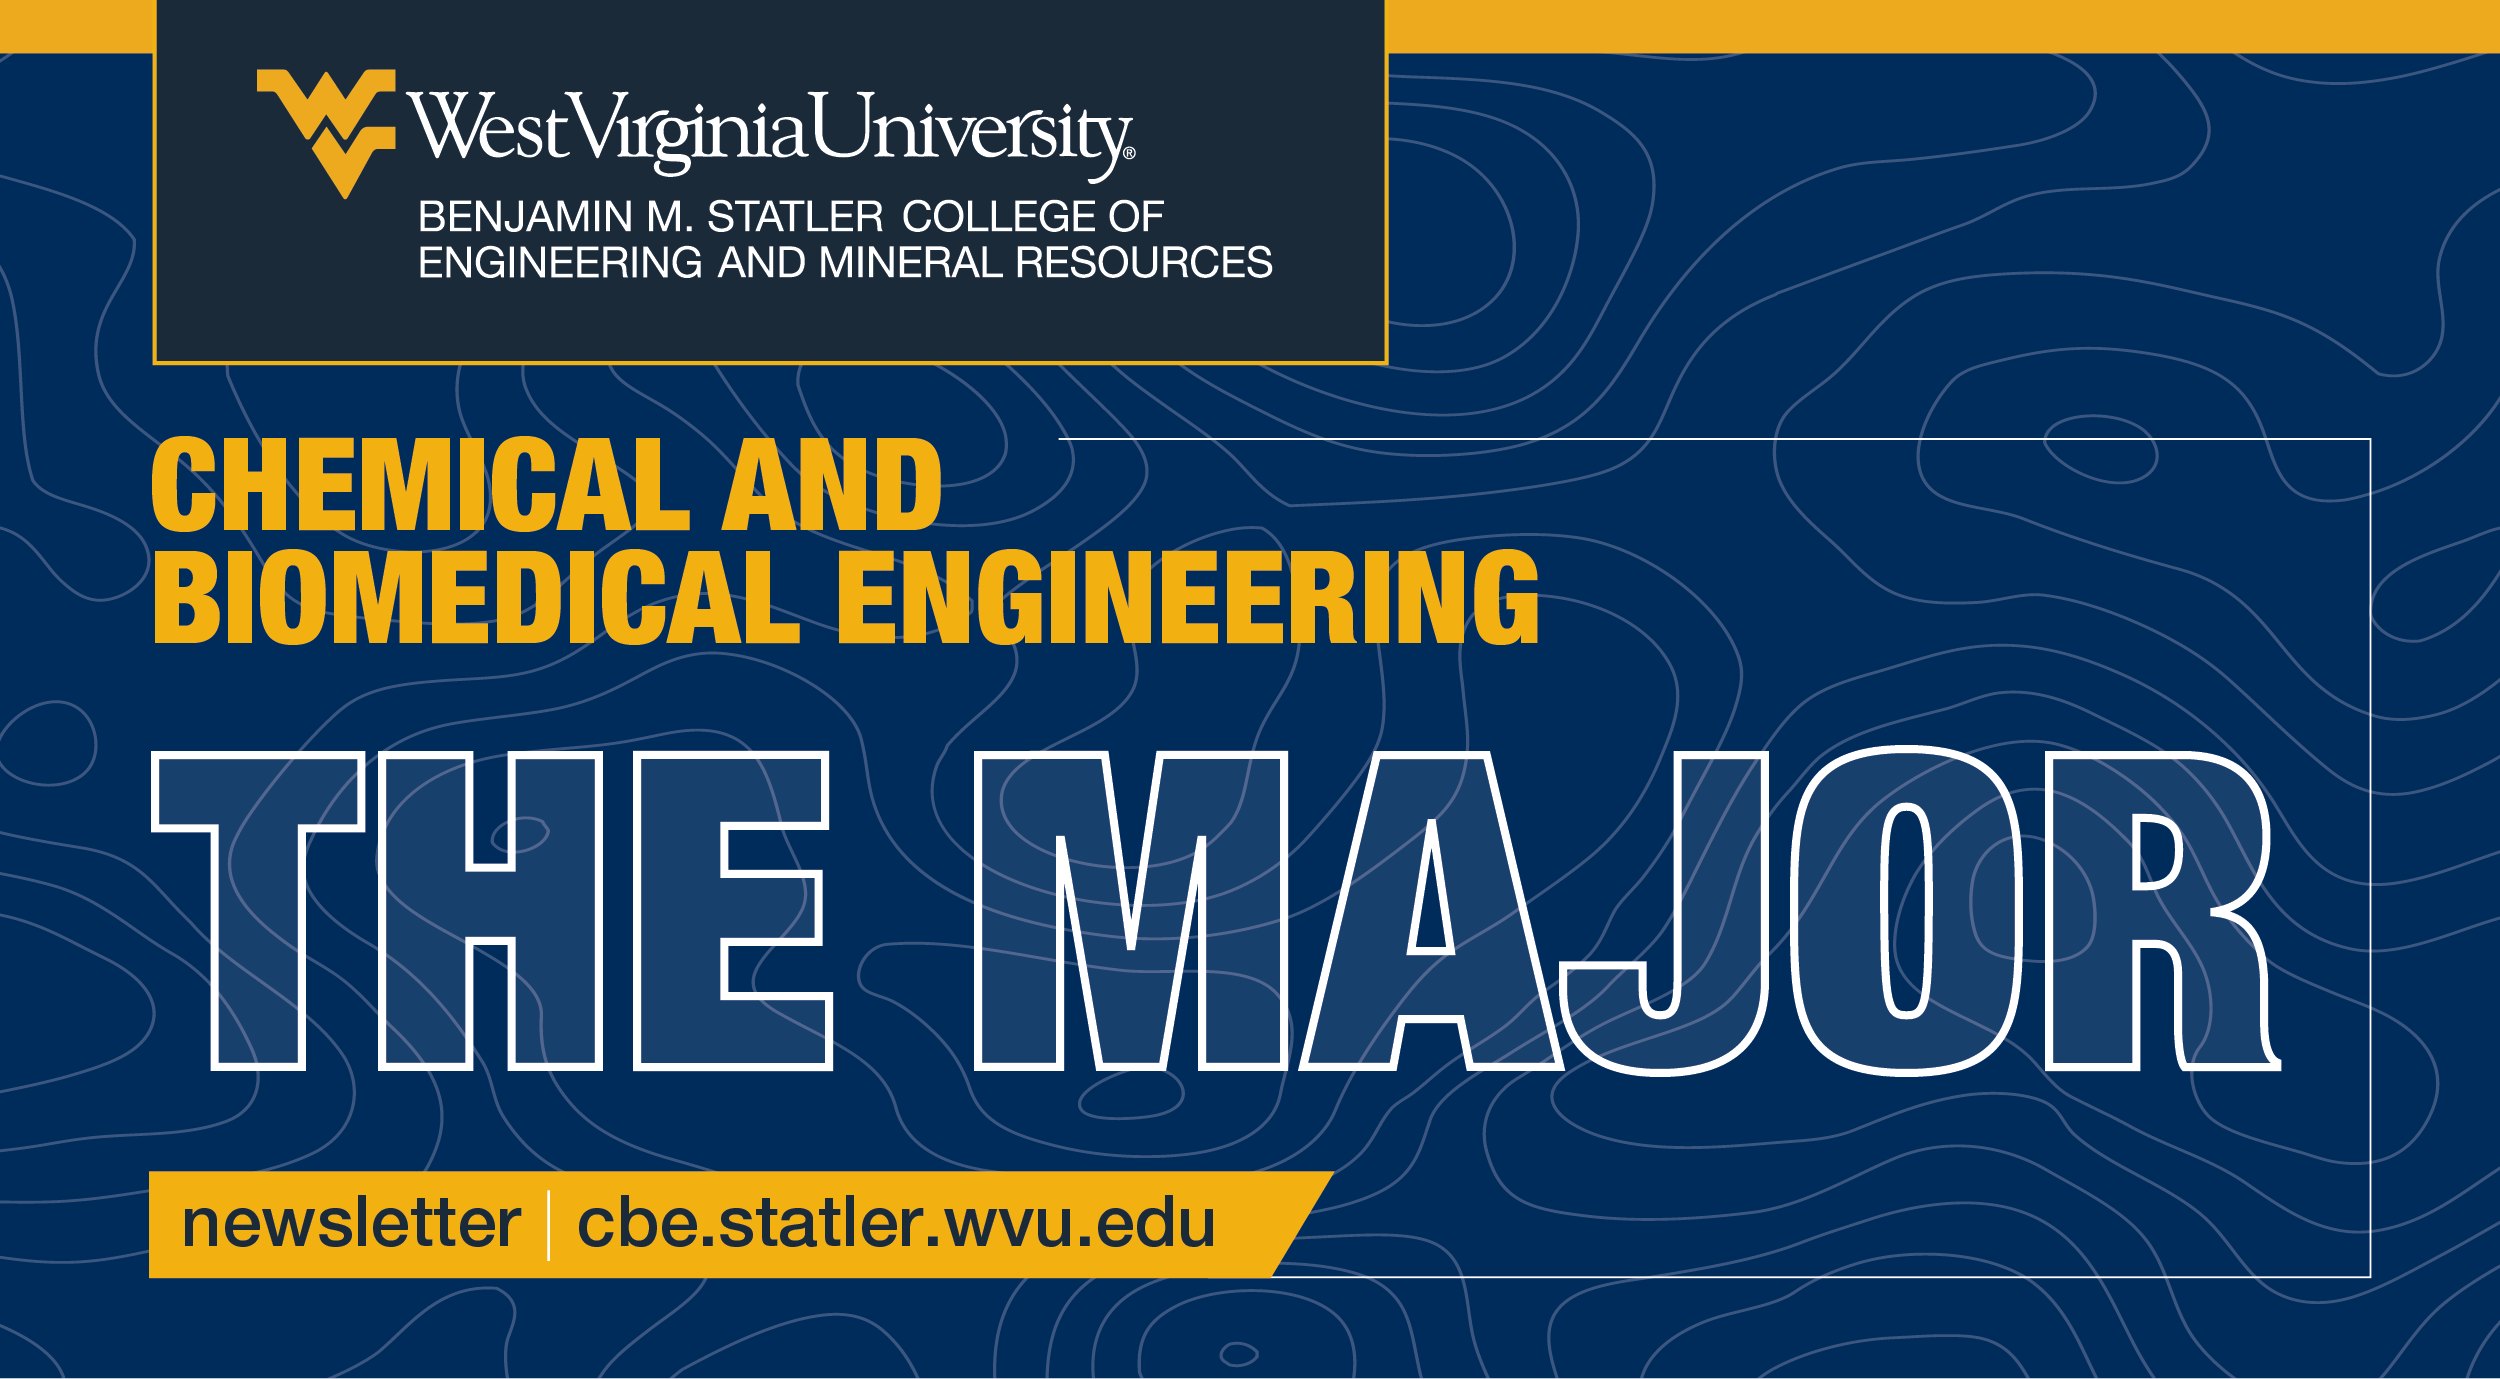 WVU Benjamin M. Statler College of Engineering and Mineral Resources - Chemical and Biomedical Engineering - The Major newsletter - cbe.statler.wvu.edu